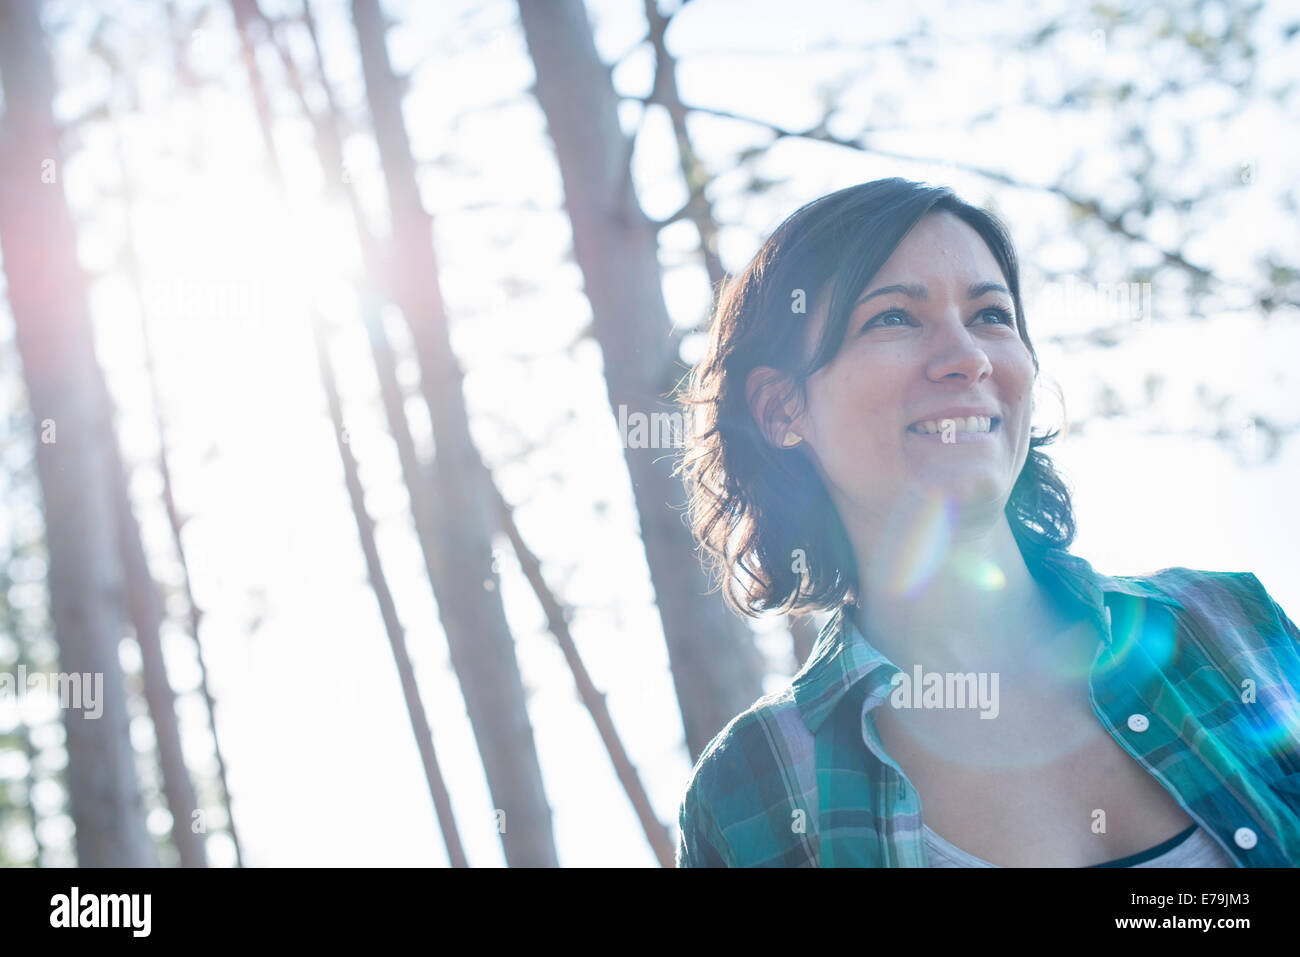 A woman walking through woodland in summer. Stock Photo